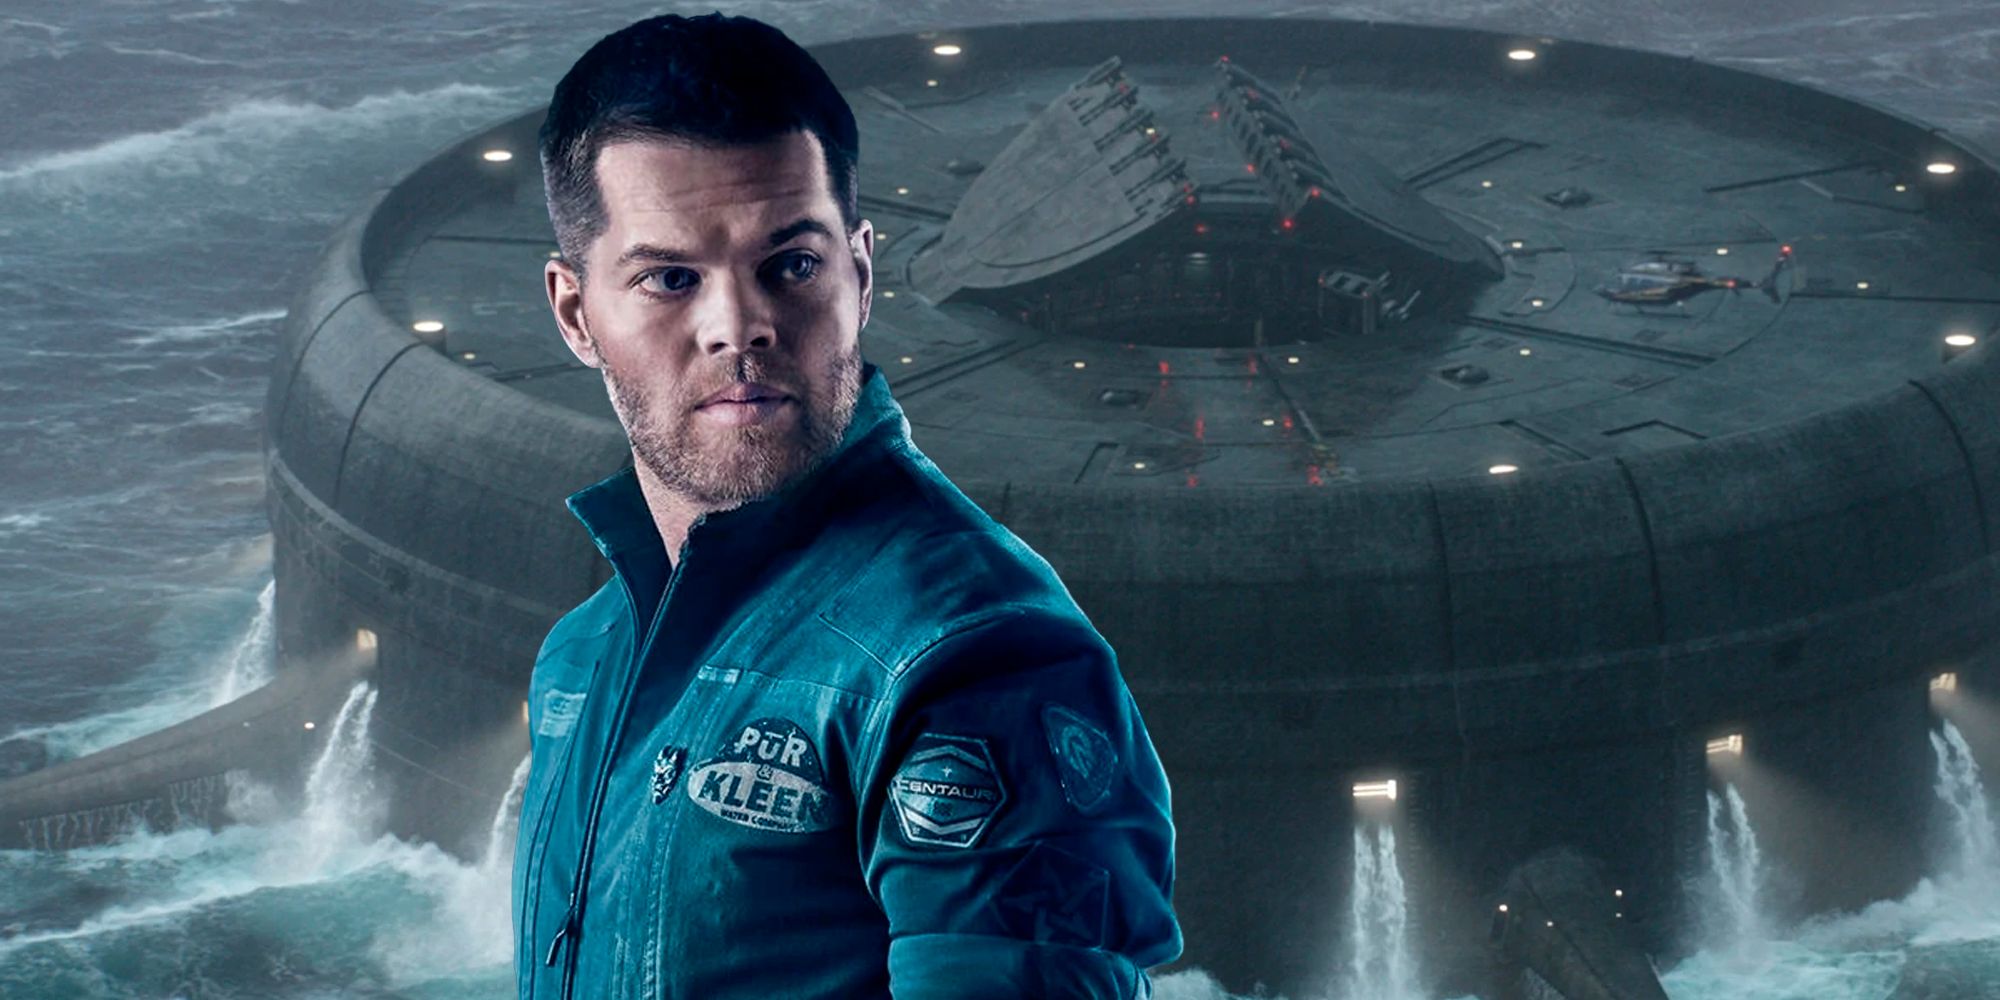 The Expanse Season 5 Has a Prison Similar to Marvel Raft and Wes Chatham as Amos